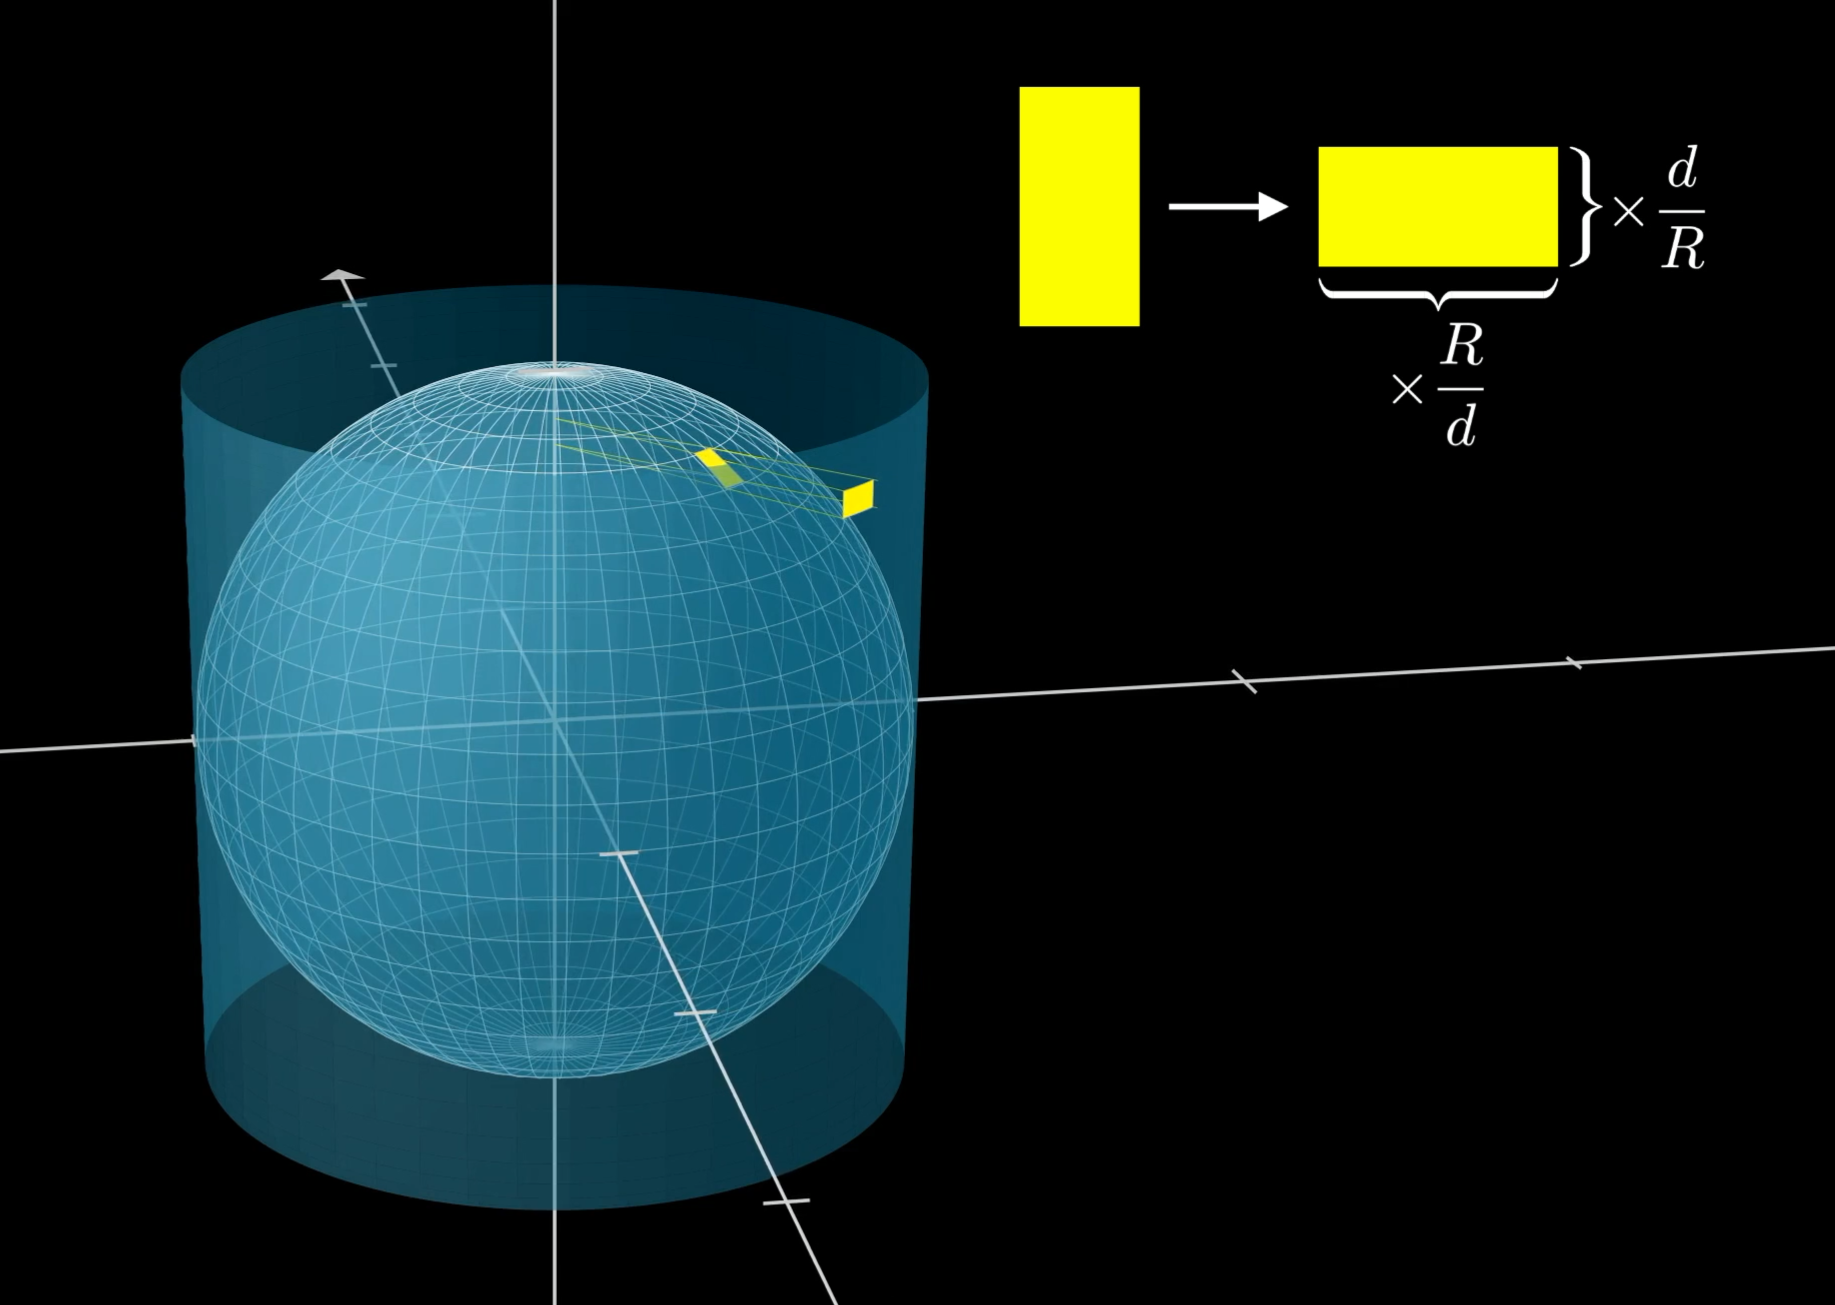 Why the surface area of sphere is 4*pi*r^2? - Quora